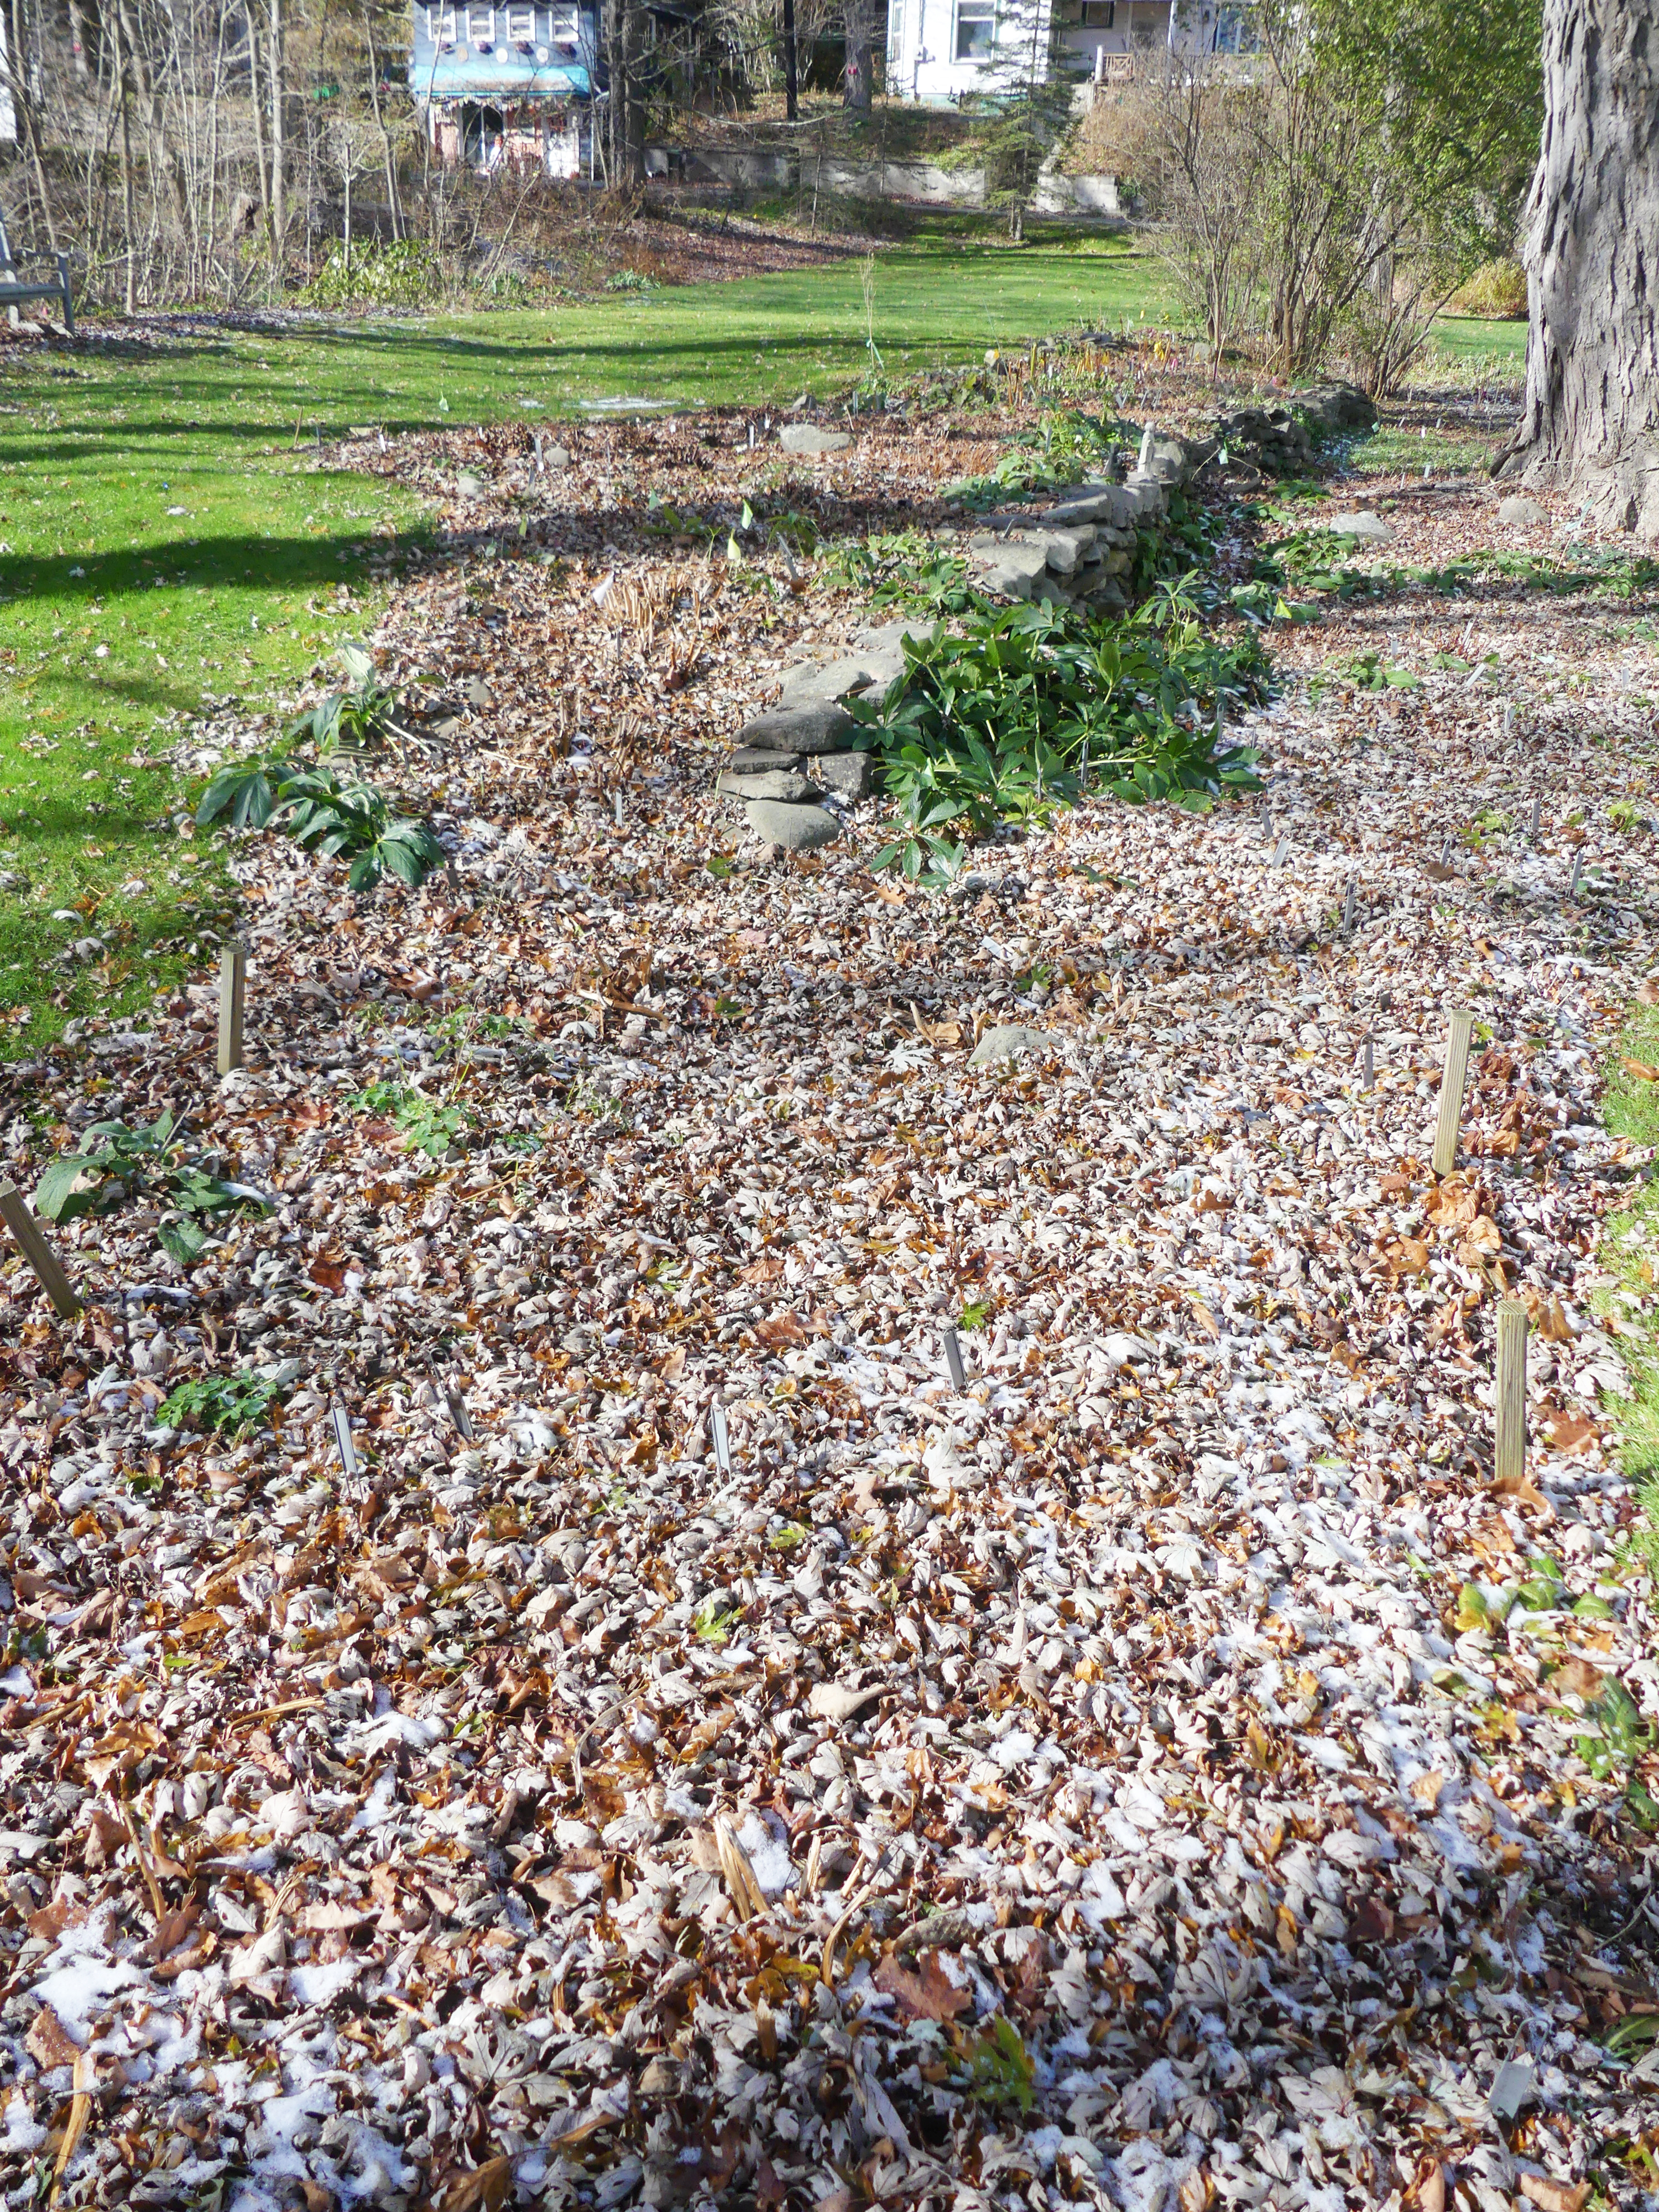 Once the garden is cleaned it can be lightly mulched with a 2-inch fluffy layer of maple leaves if available. These will insulate the garden from the sun but still retain some of the soil’s warmth. In late December, when the ground is frozen, a heavier mulch can be added for more protection. ANDREW MESSINGER